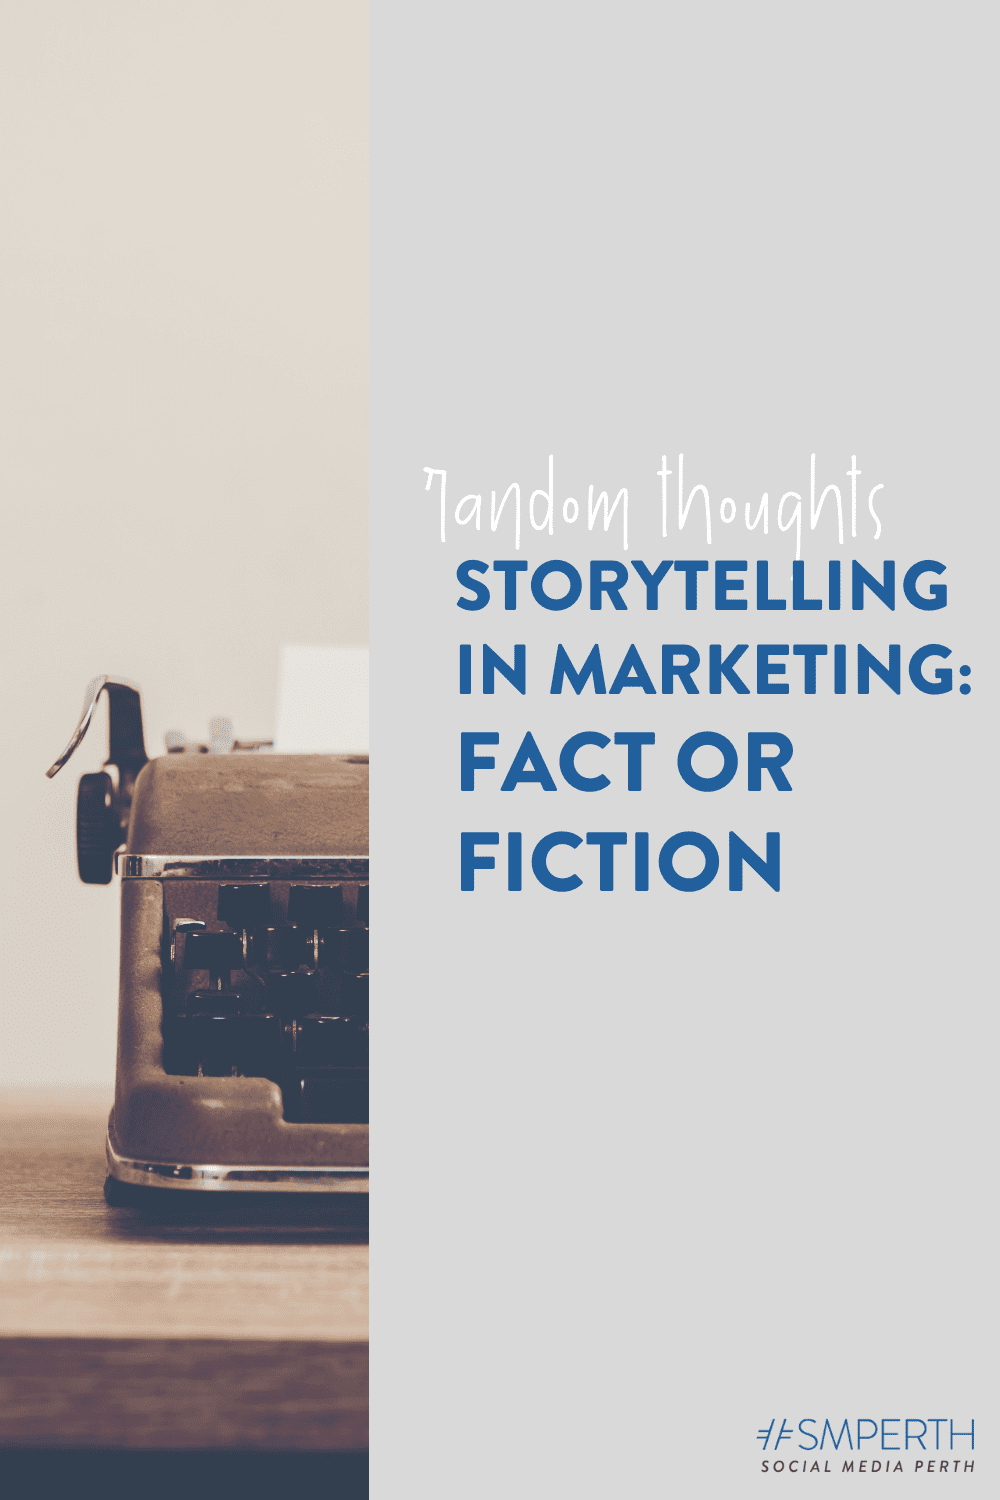 Storytelling in marketing: fact or fiction